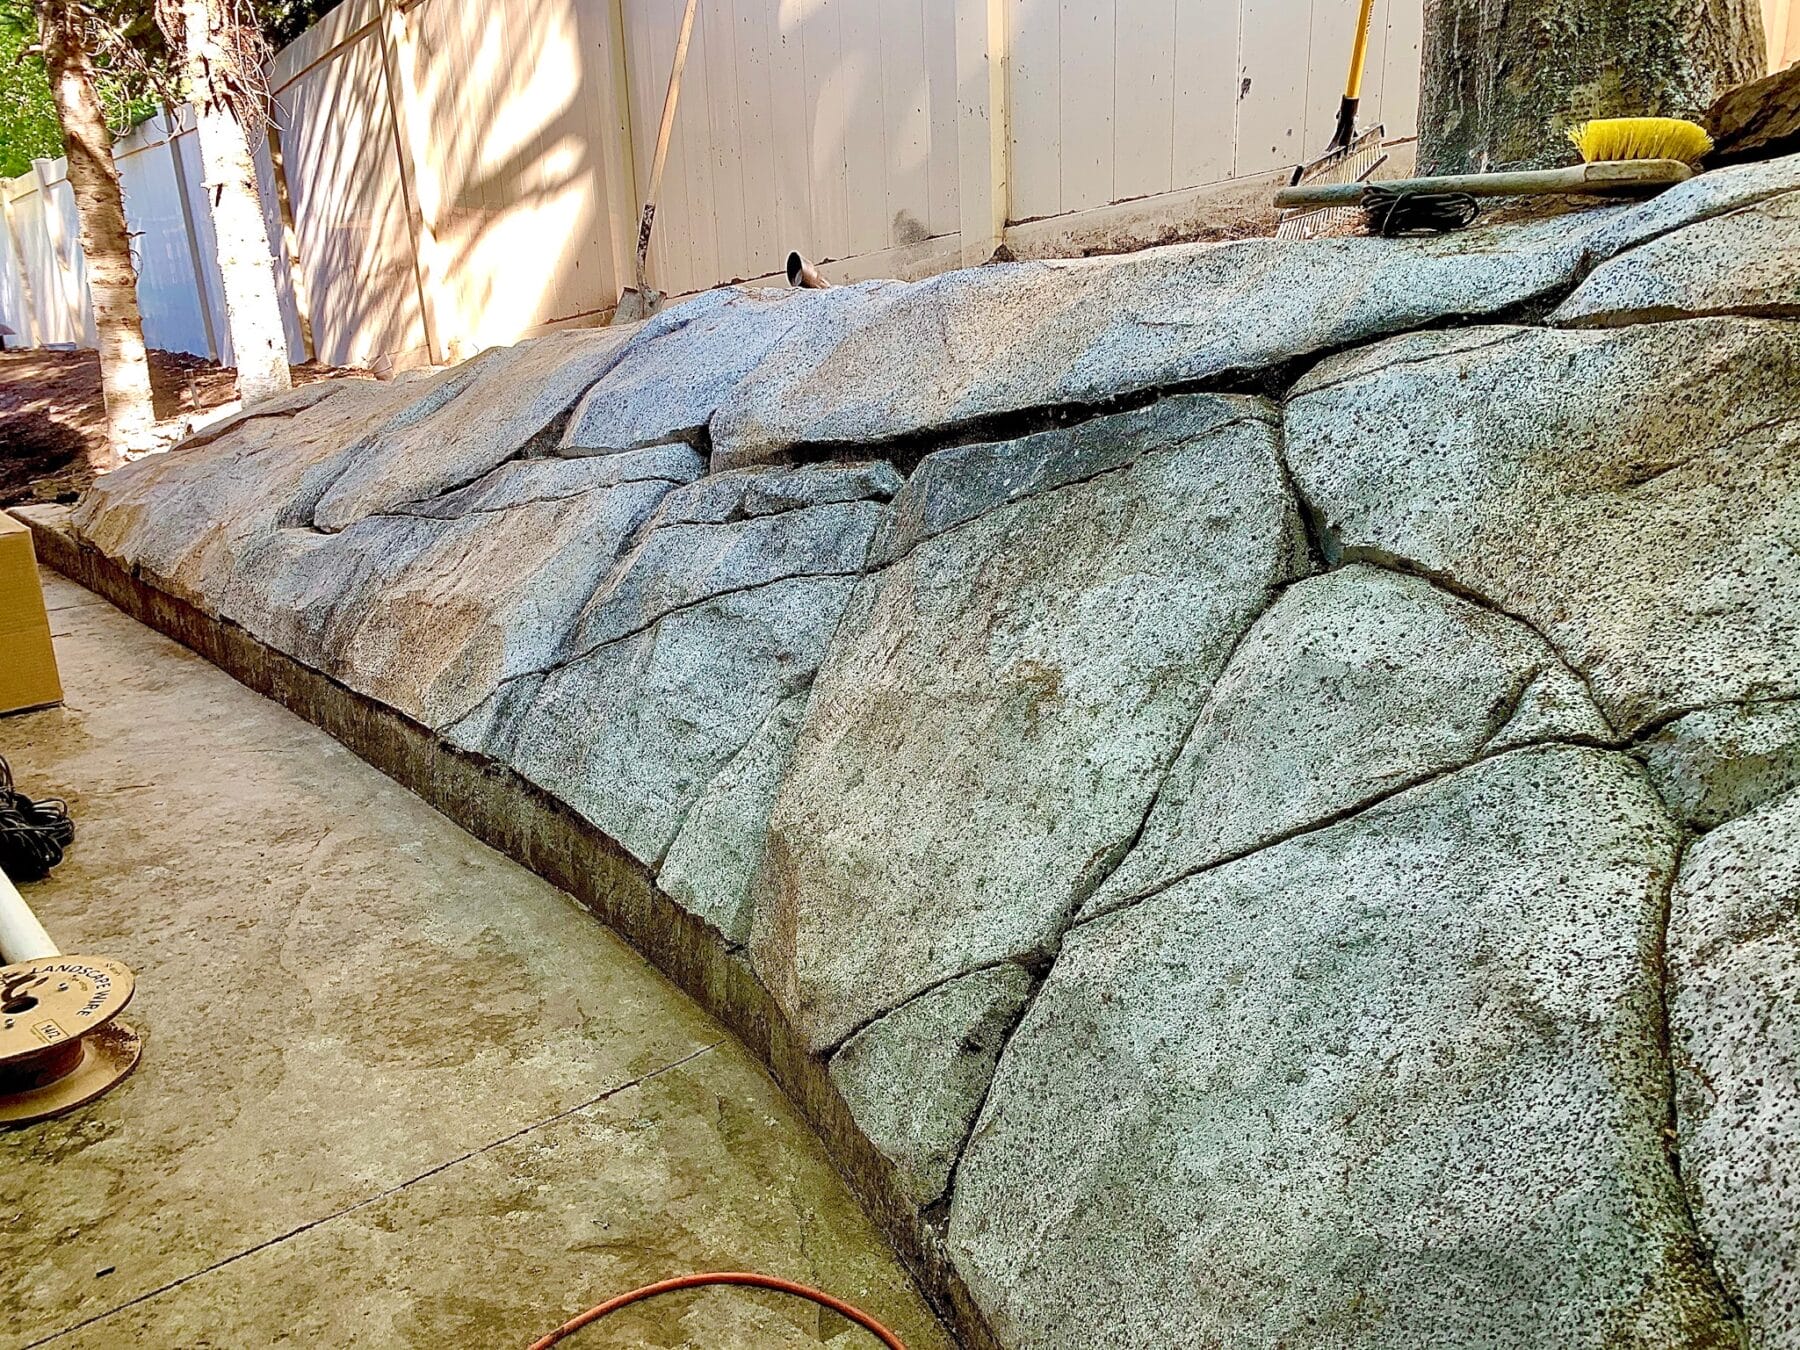 Artificial Concrete Rock Work achieves natural rock aesthetic in Salt Lake City patio construction project